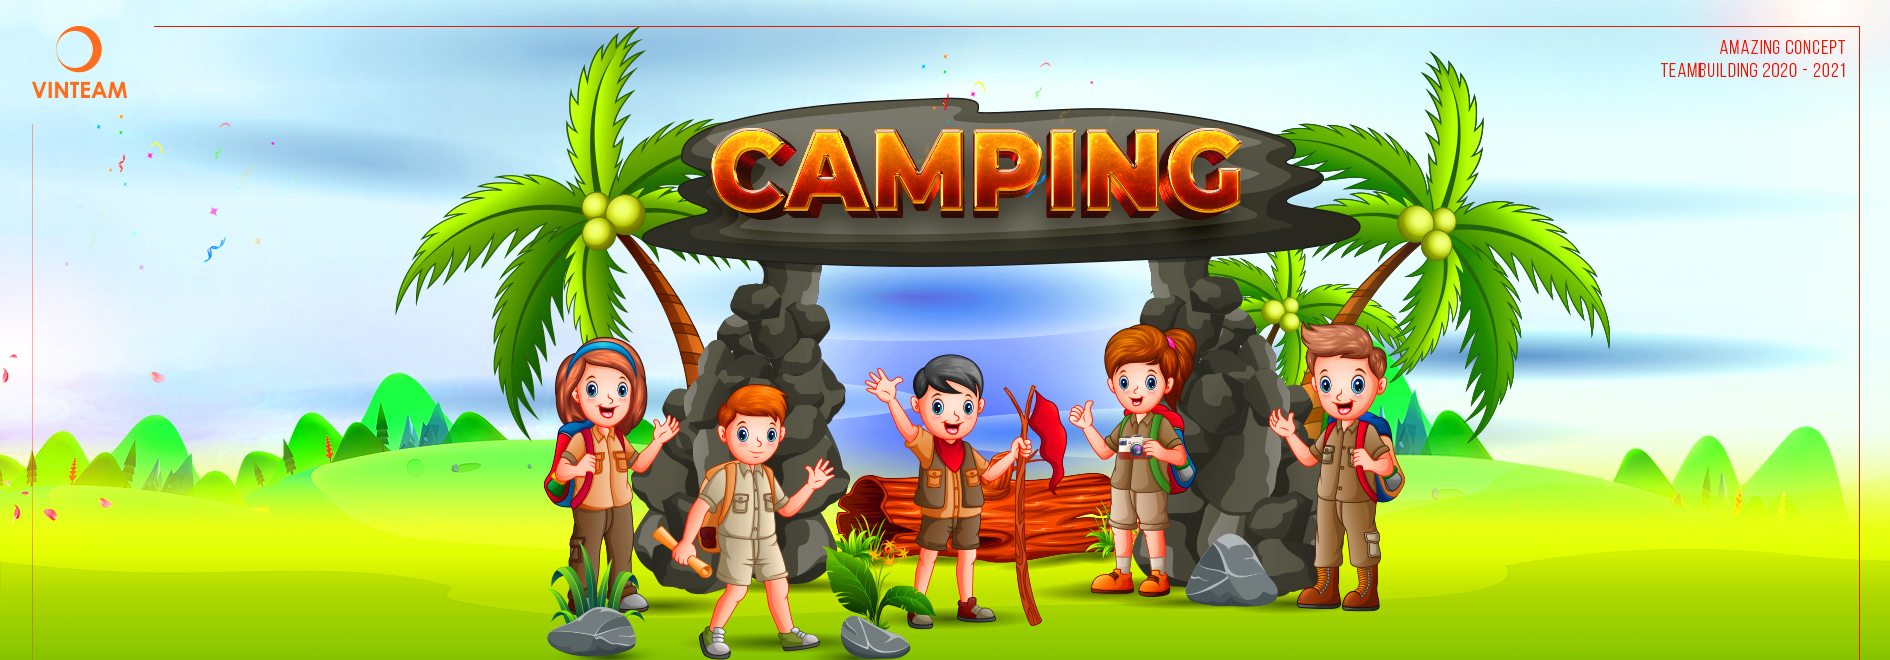 8.-cover-CAMPING